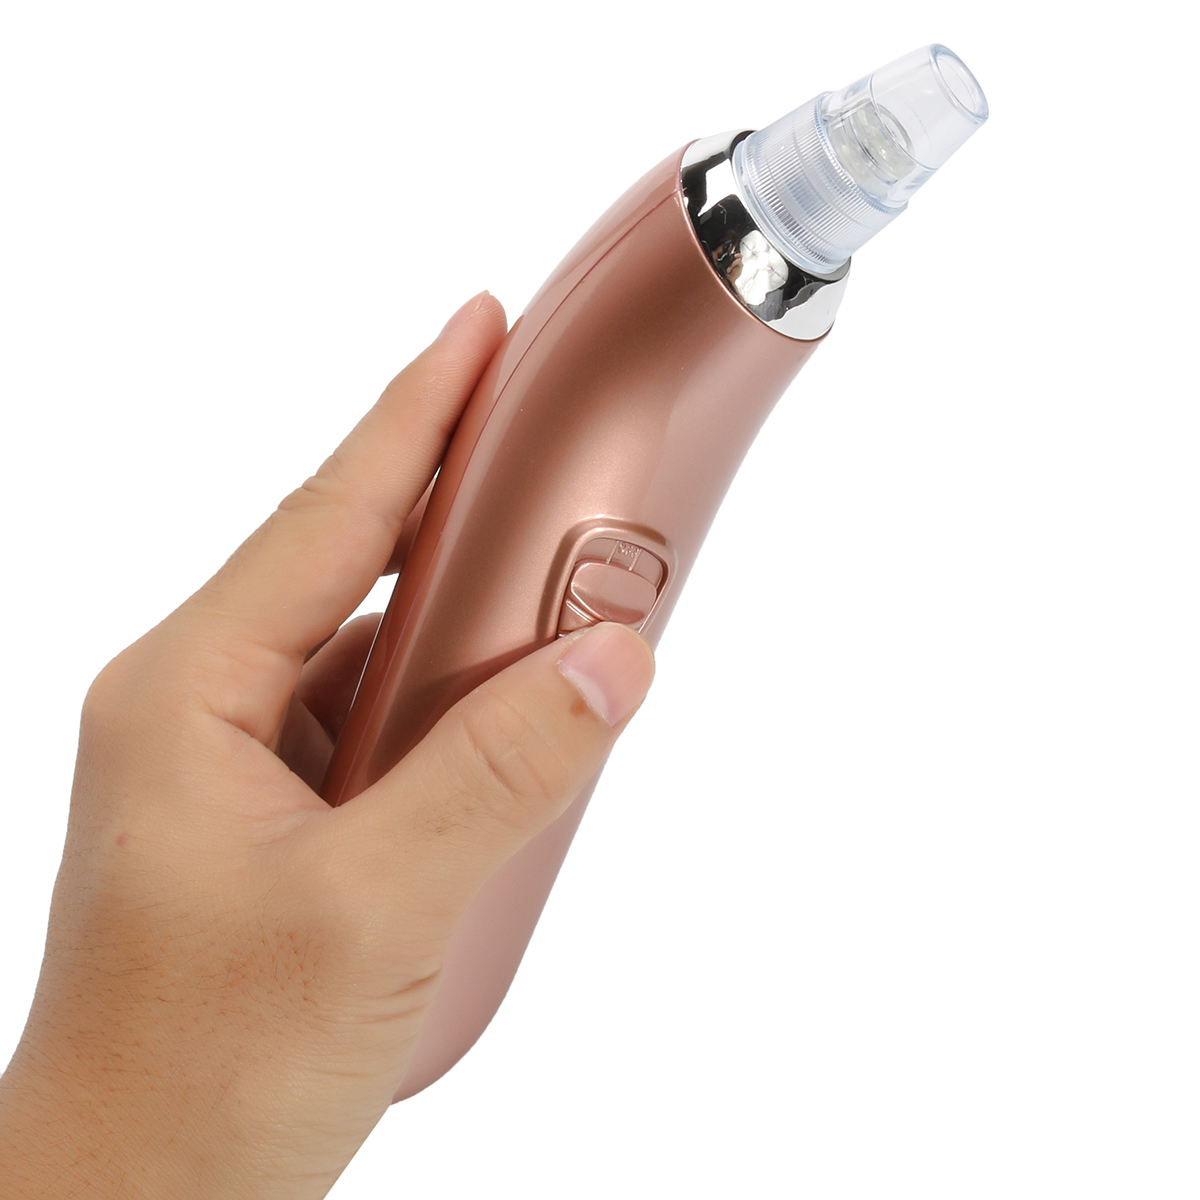 Electric-Facial-Vacuum-Blackhead-Acne-Remover-Nose-Pore-Deep-Cleanser-Tools-Lifting-Firming-Skin-1223503